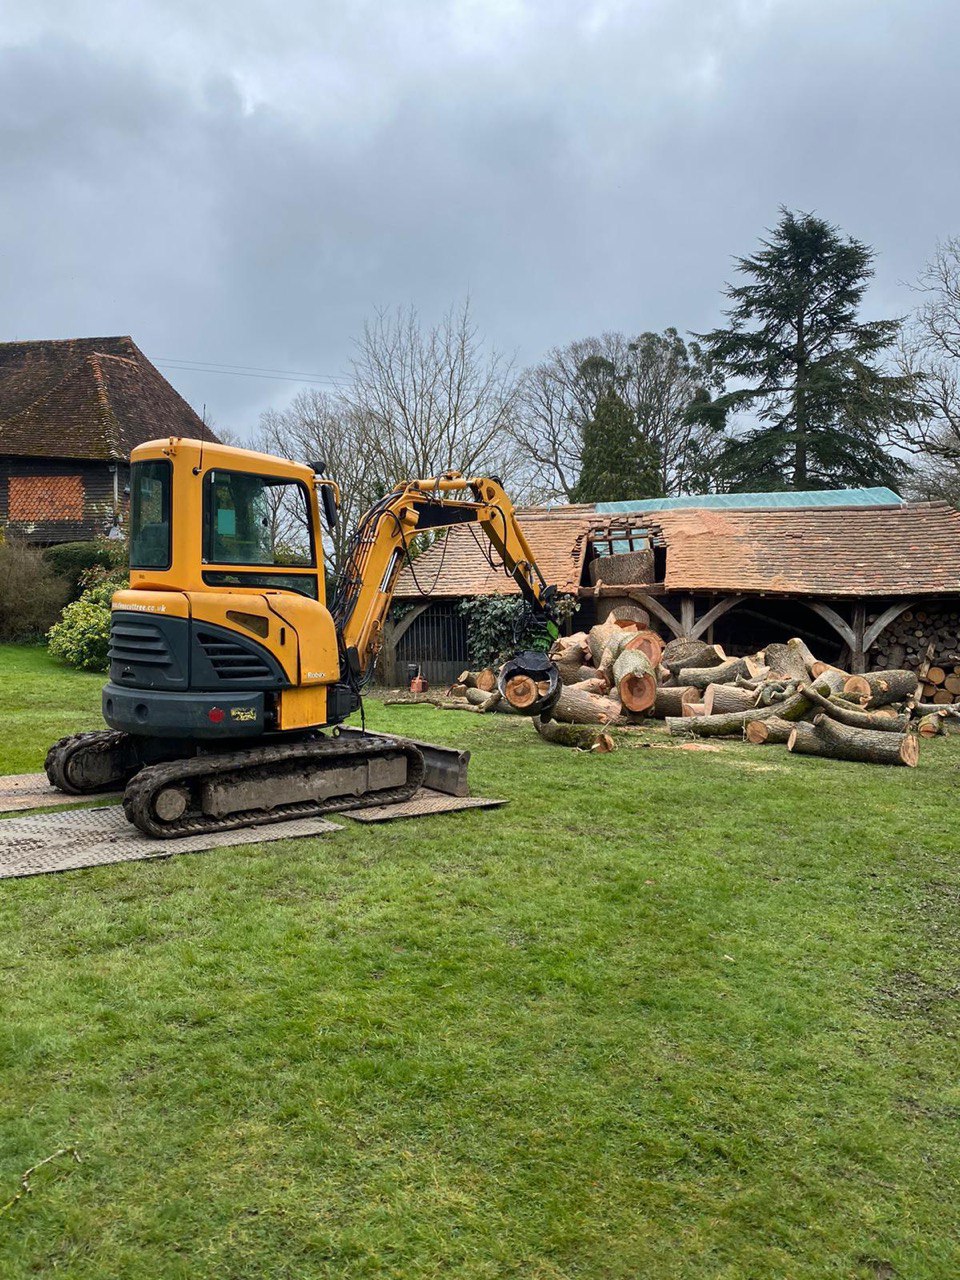 This is a photo of tree felling being carried out in Tenterden. All works are being undertaken by Tenterden Tree Surgeons